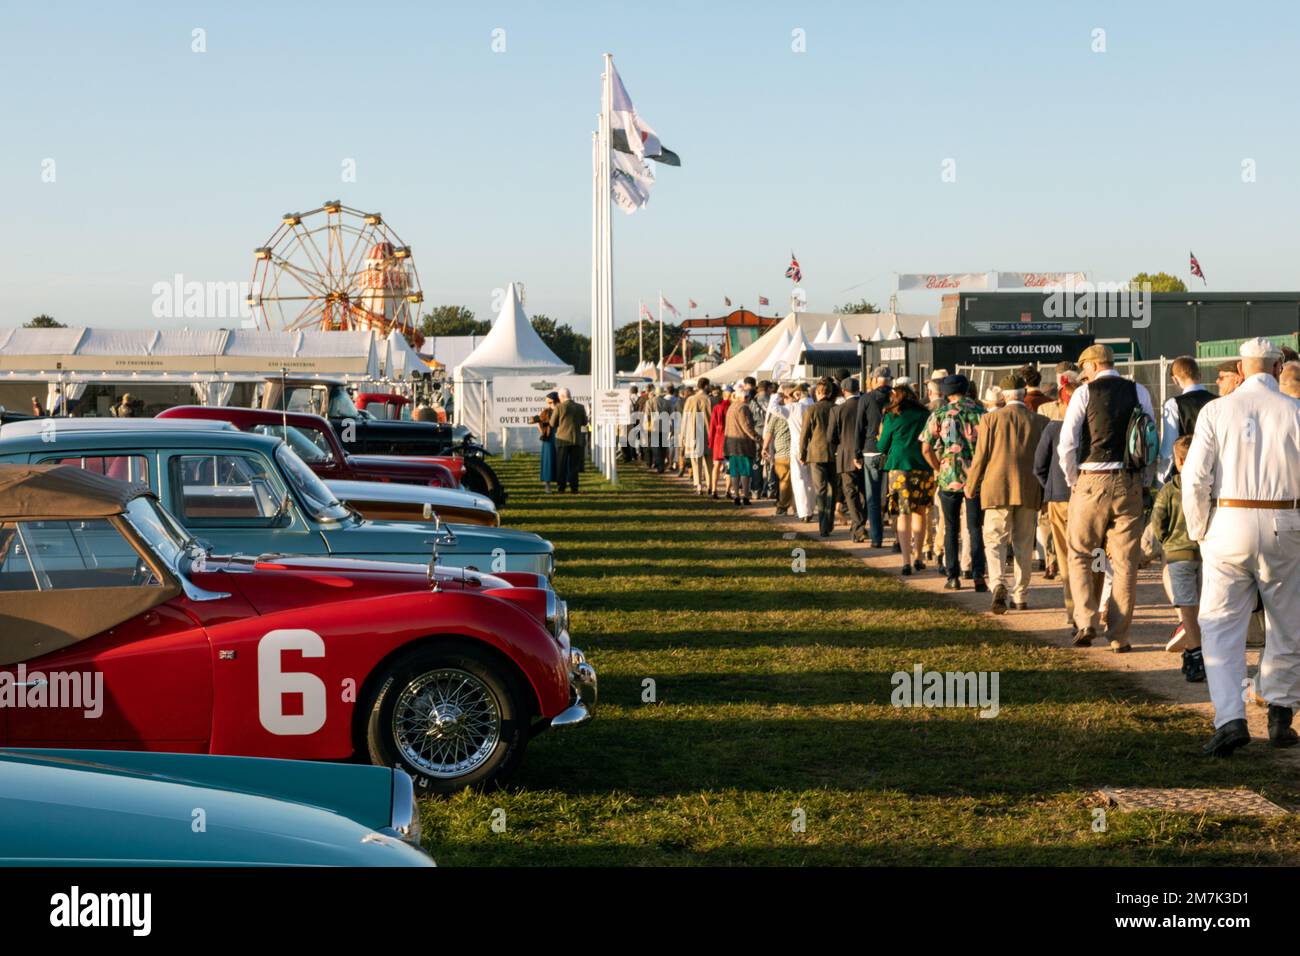 GOODWOOD, WEST SUSSEX, UK - 14 SETTEMBRE 2019: Persone in coda per partecipare all'evento Goodwood Revival Motor Henthusiast Foto Stock